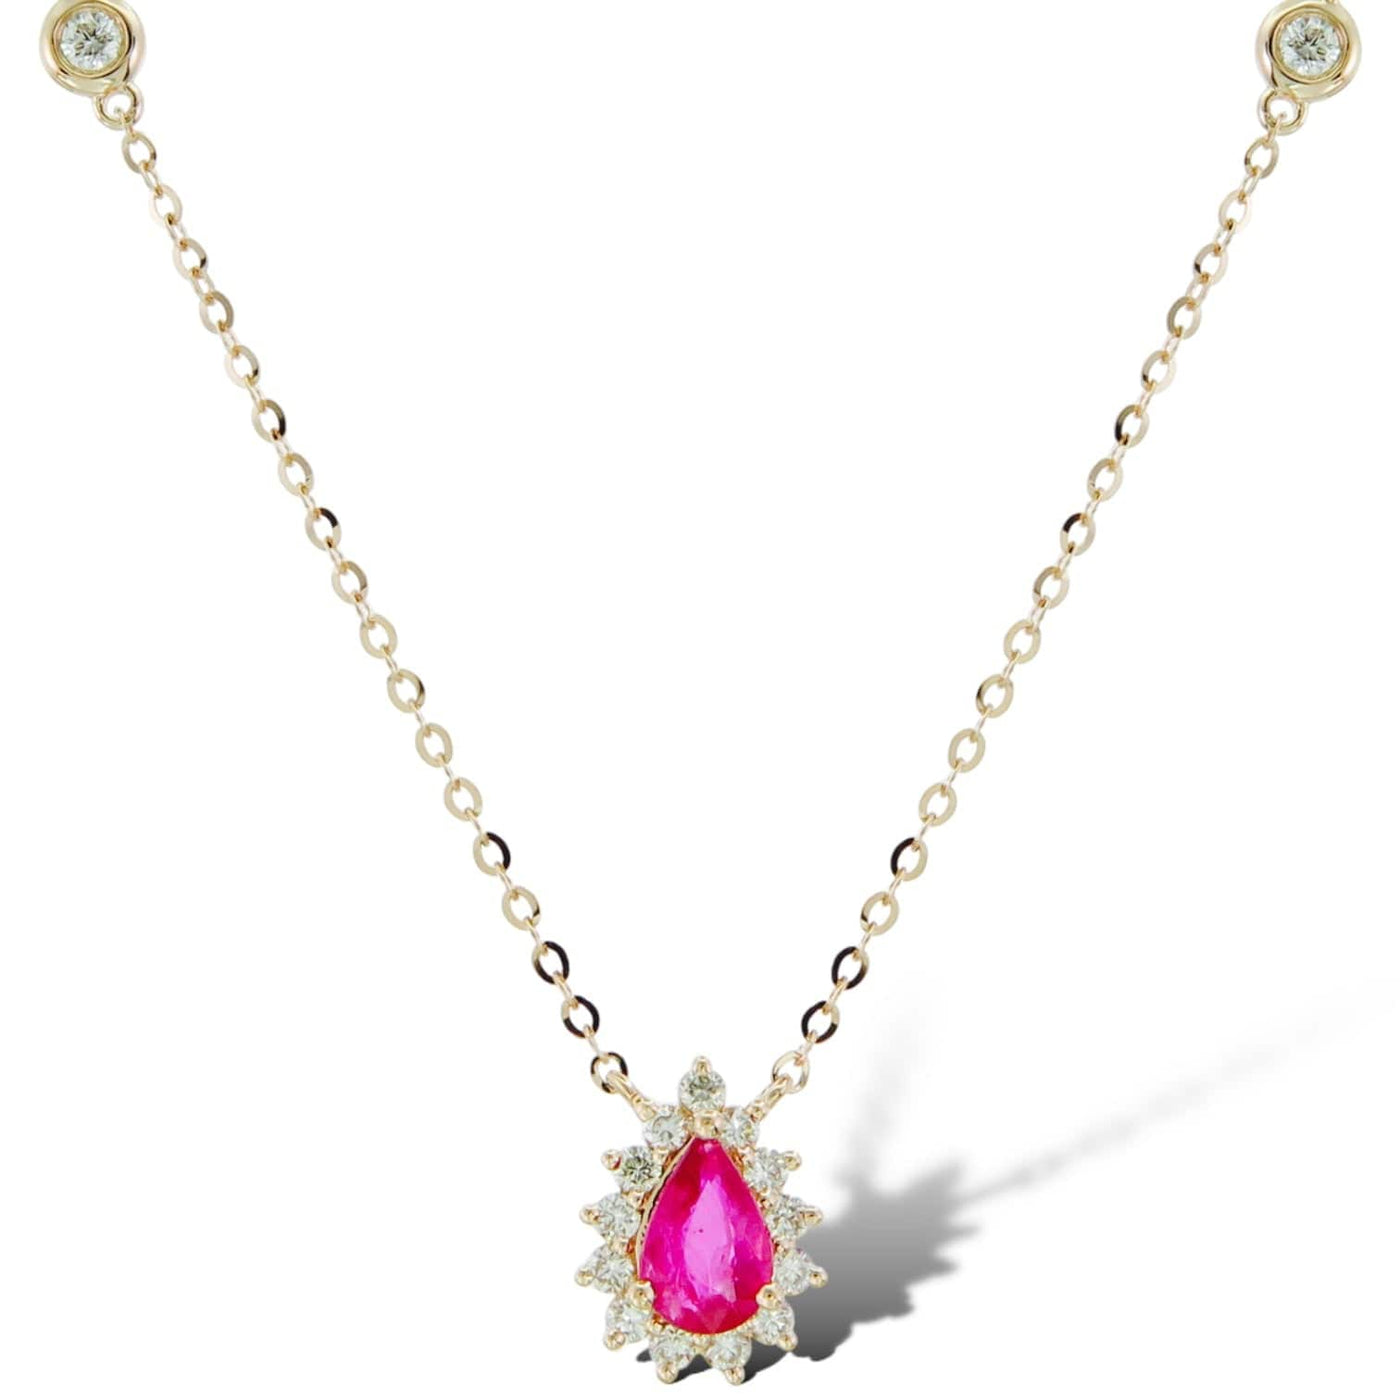 PEAR SHAPED DIANA PENDANT WITH RUBY AND DIAMONDS